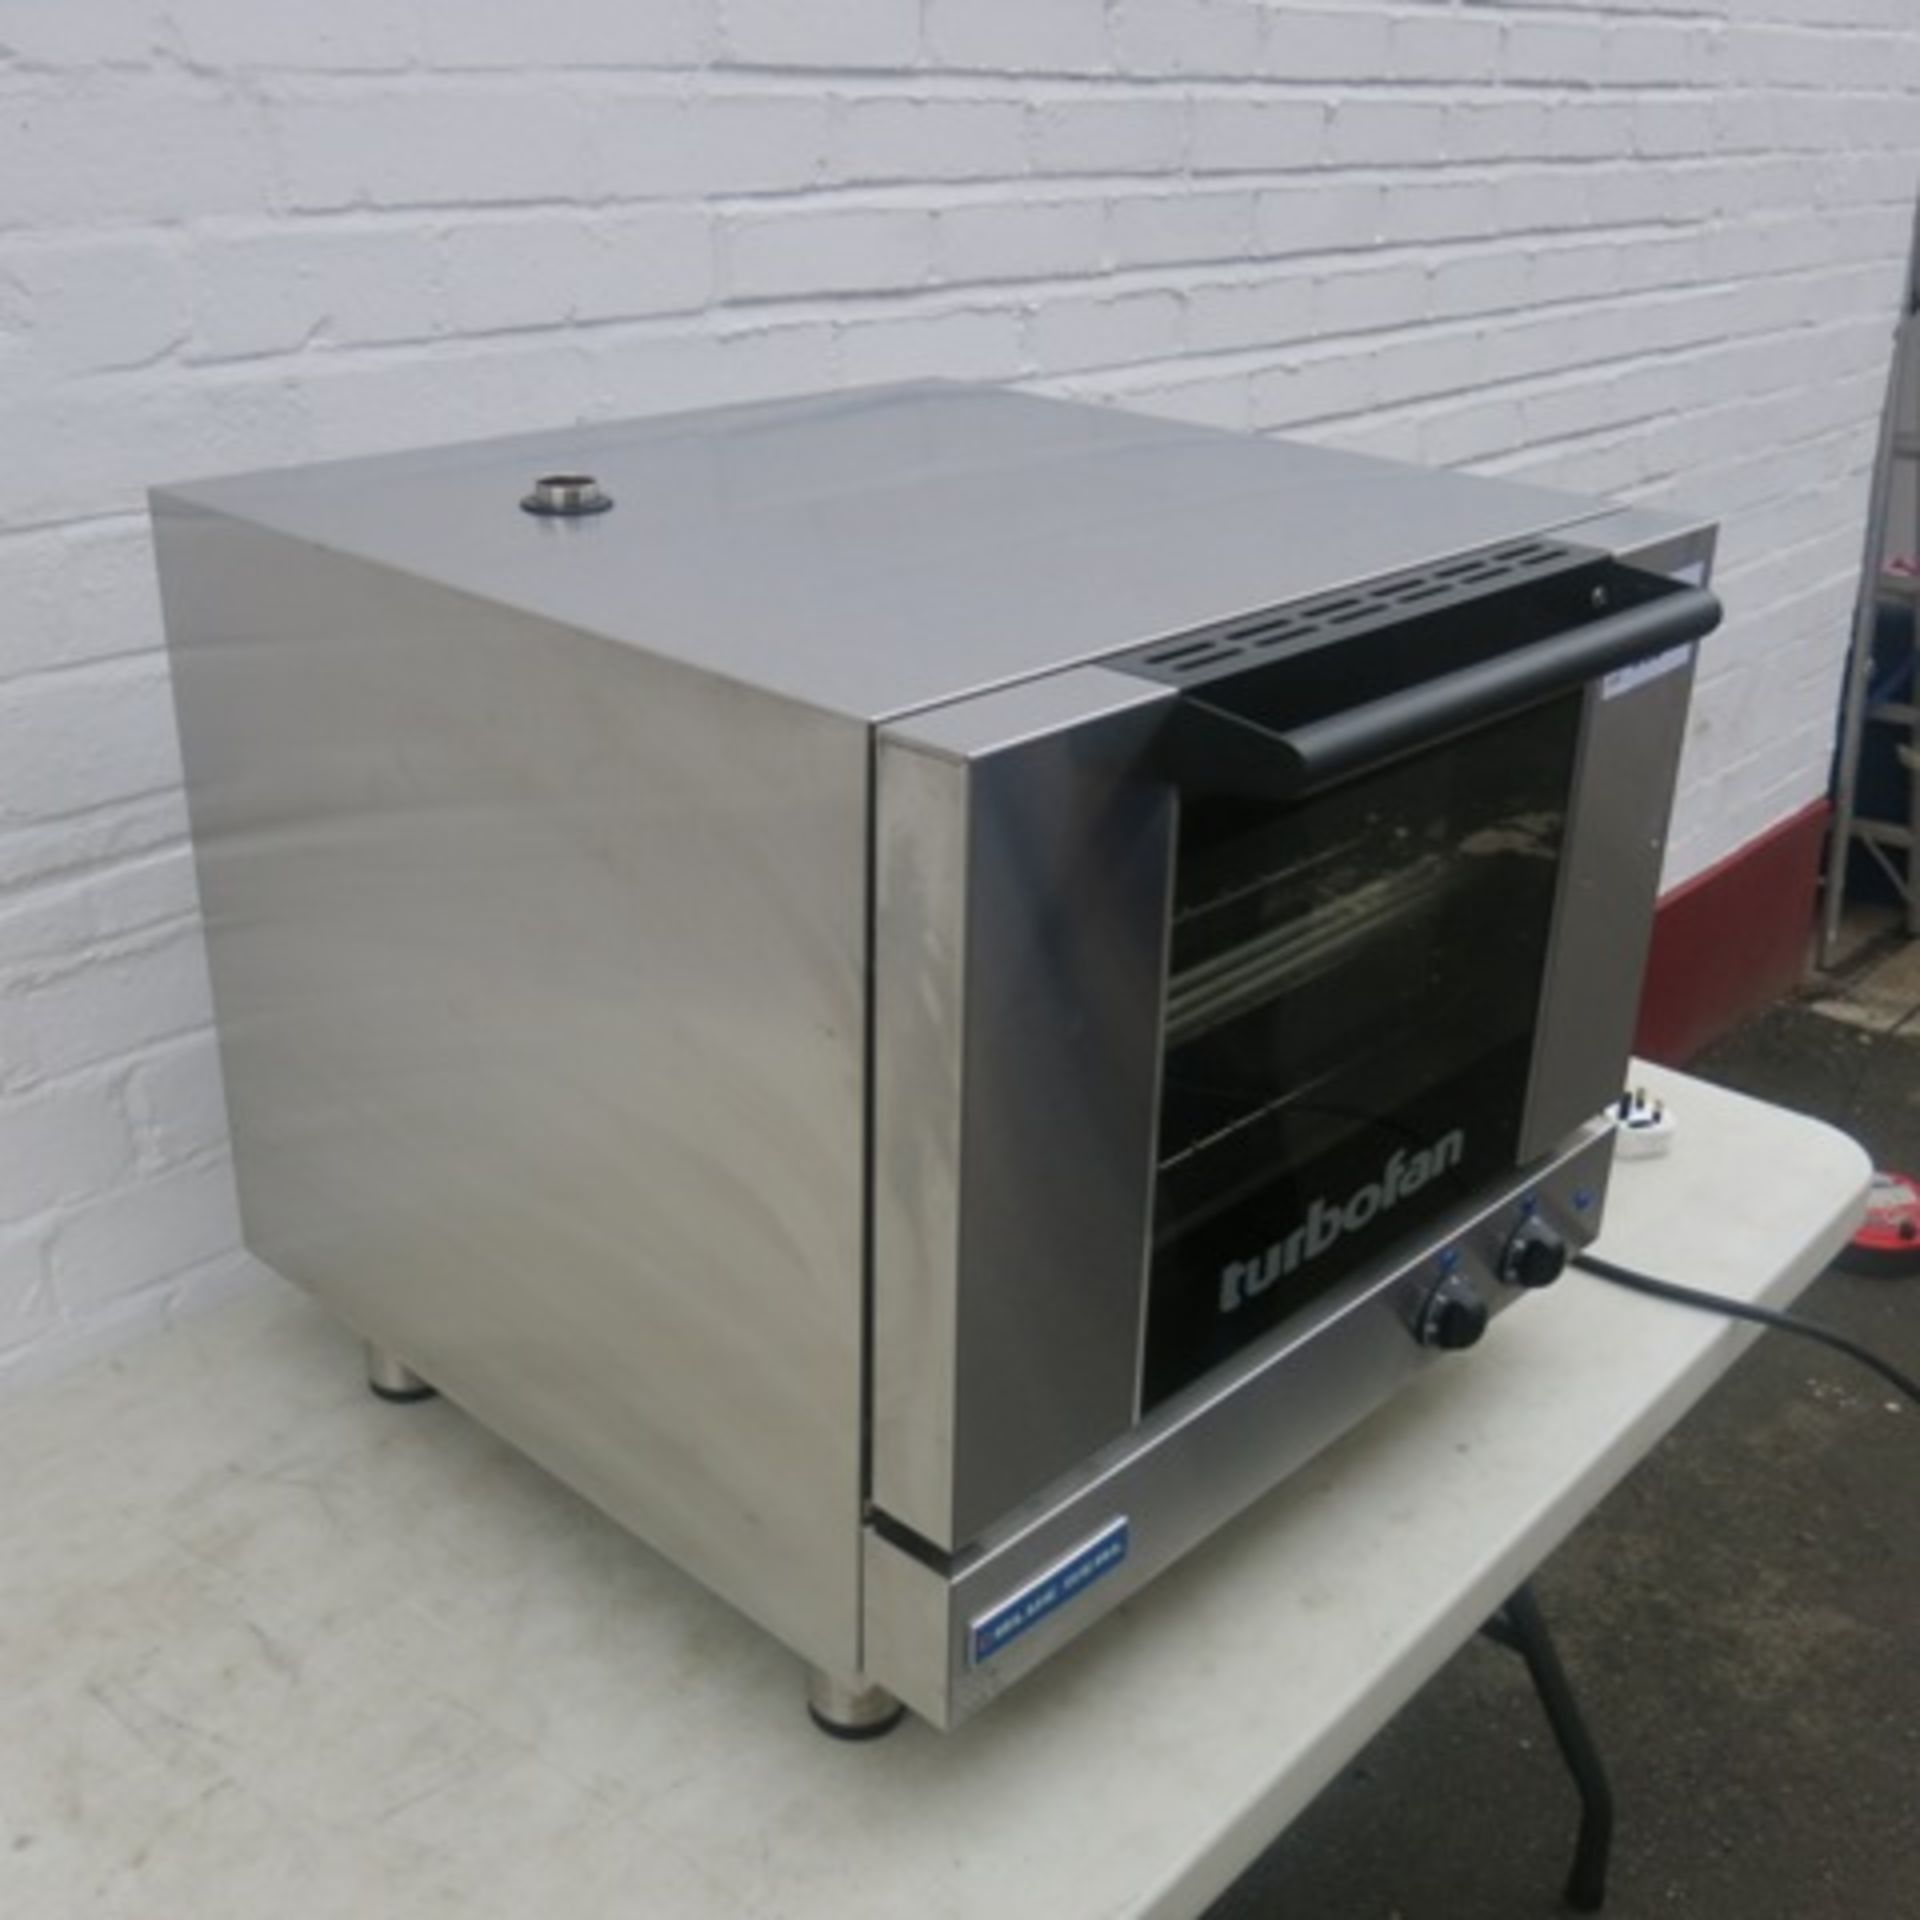 Blue Seal Counter Top Turbo Fan Convection Oven, Model E22M3. Comes with 3 Trays - Image 2 of 9